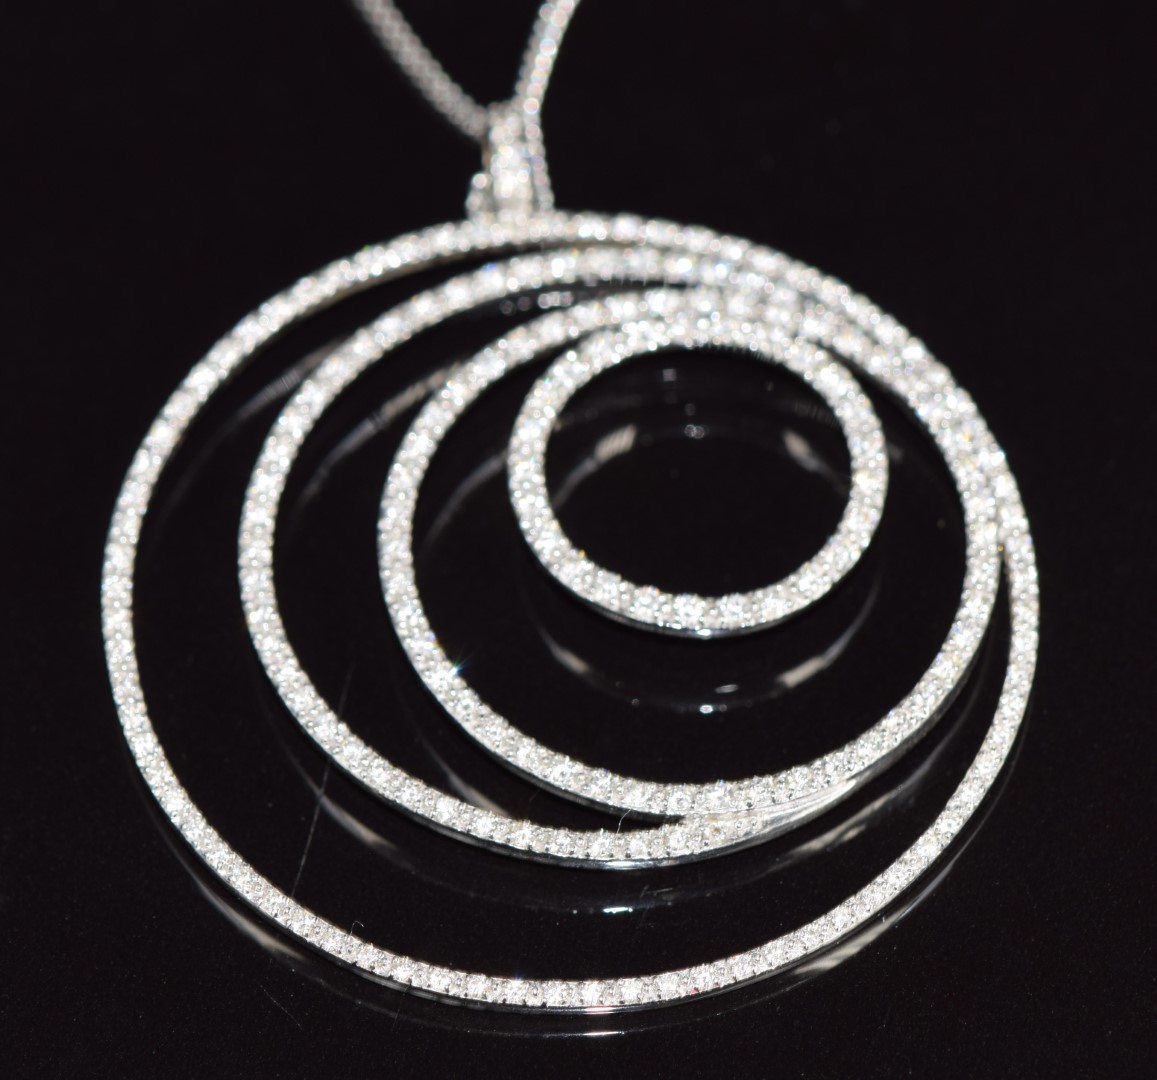 An 18ct white gold concentric circle pendant set with diamonds, on a silver chain, 16.2g - Image 2 of 2